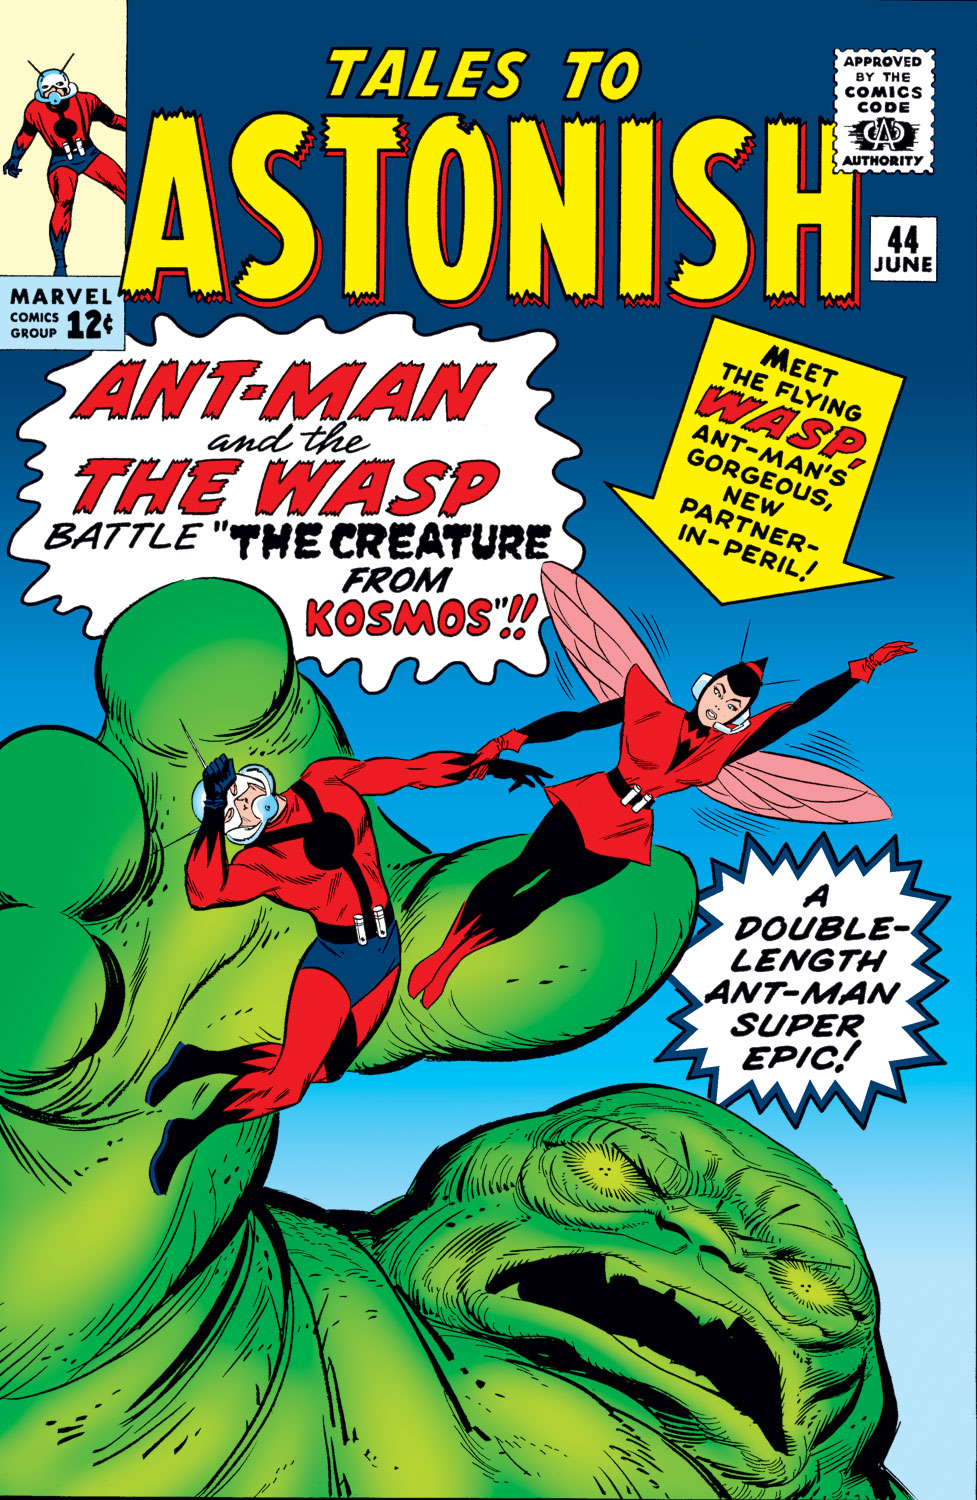 Tales to Astonish (1959) #44 | Comic Issues | Marvel